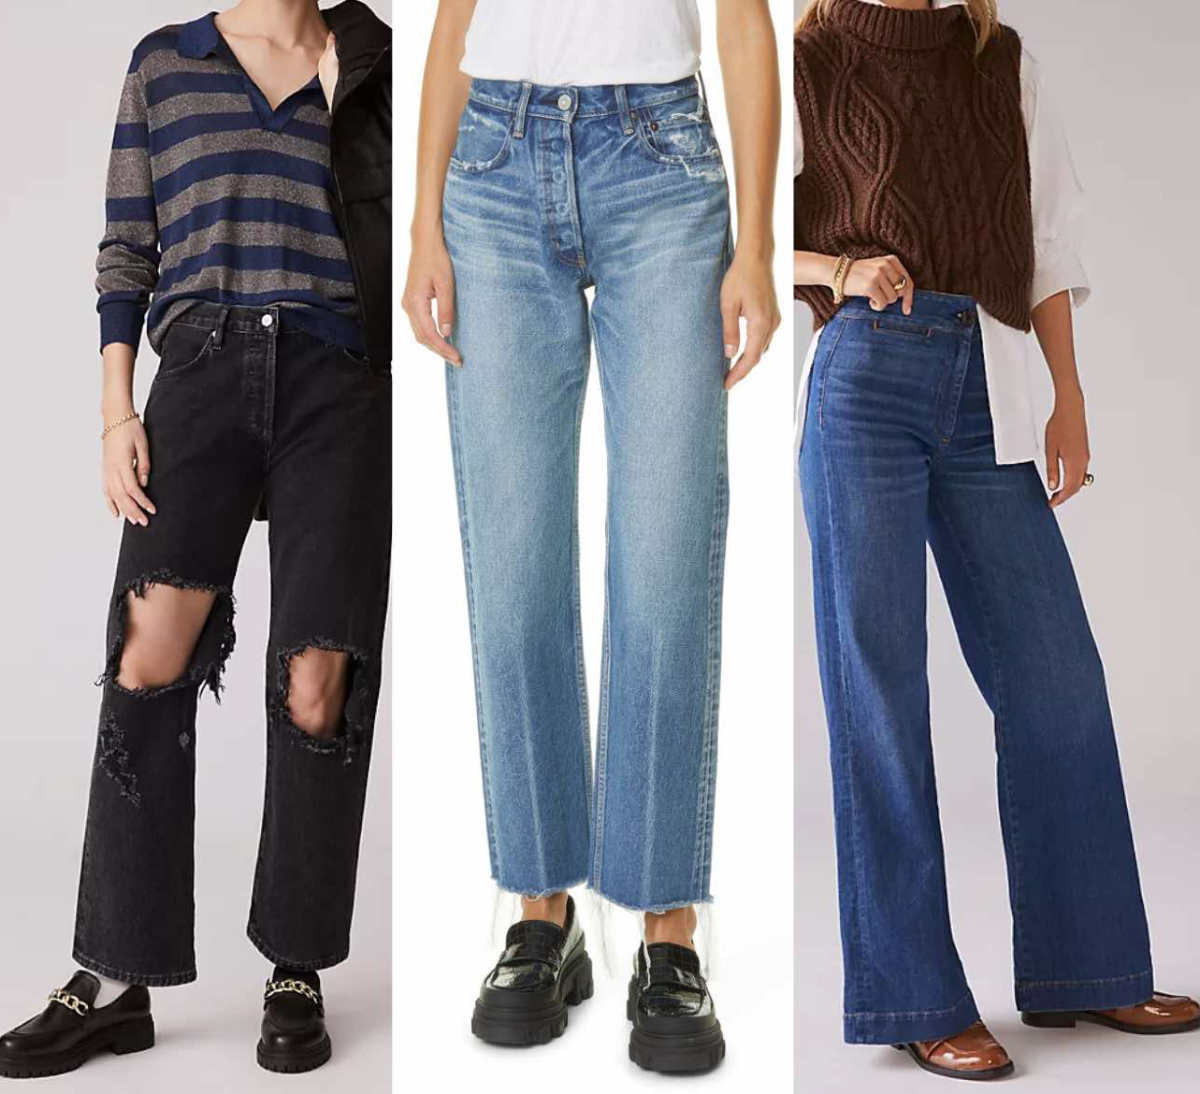 3 women wearing different loafer shoes with wide leg jeans.